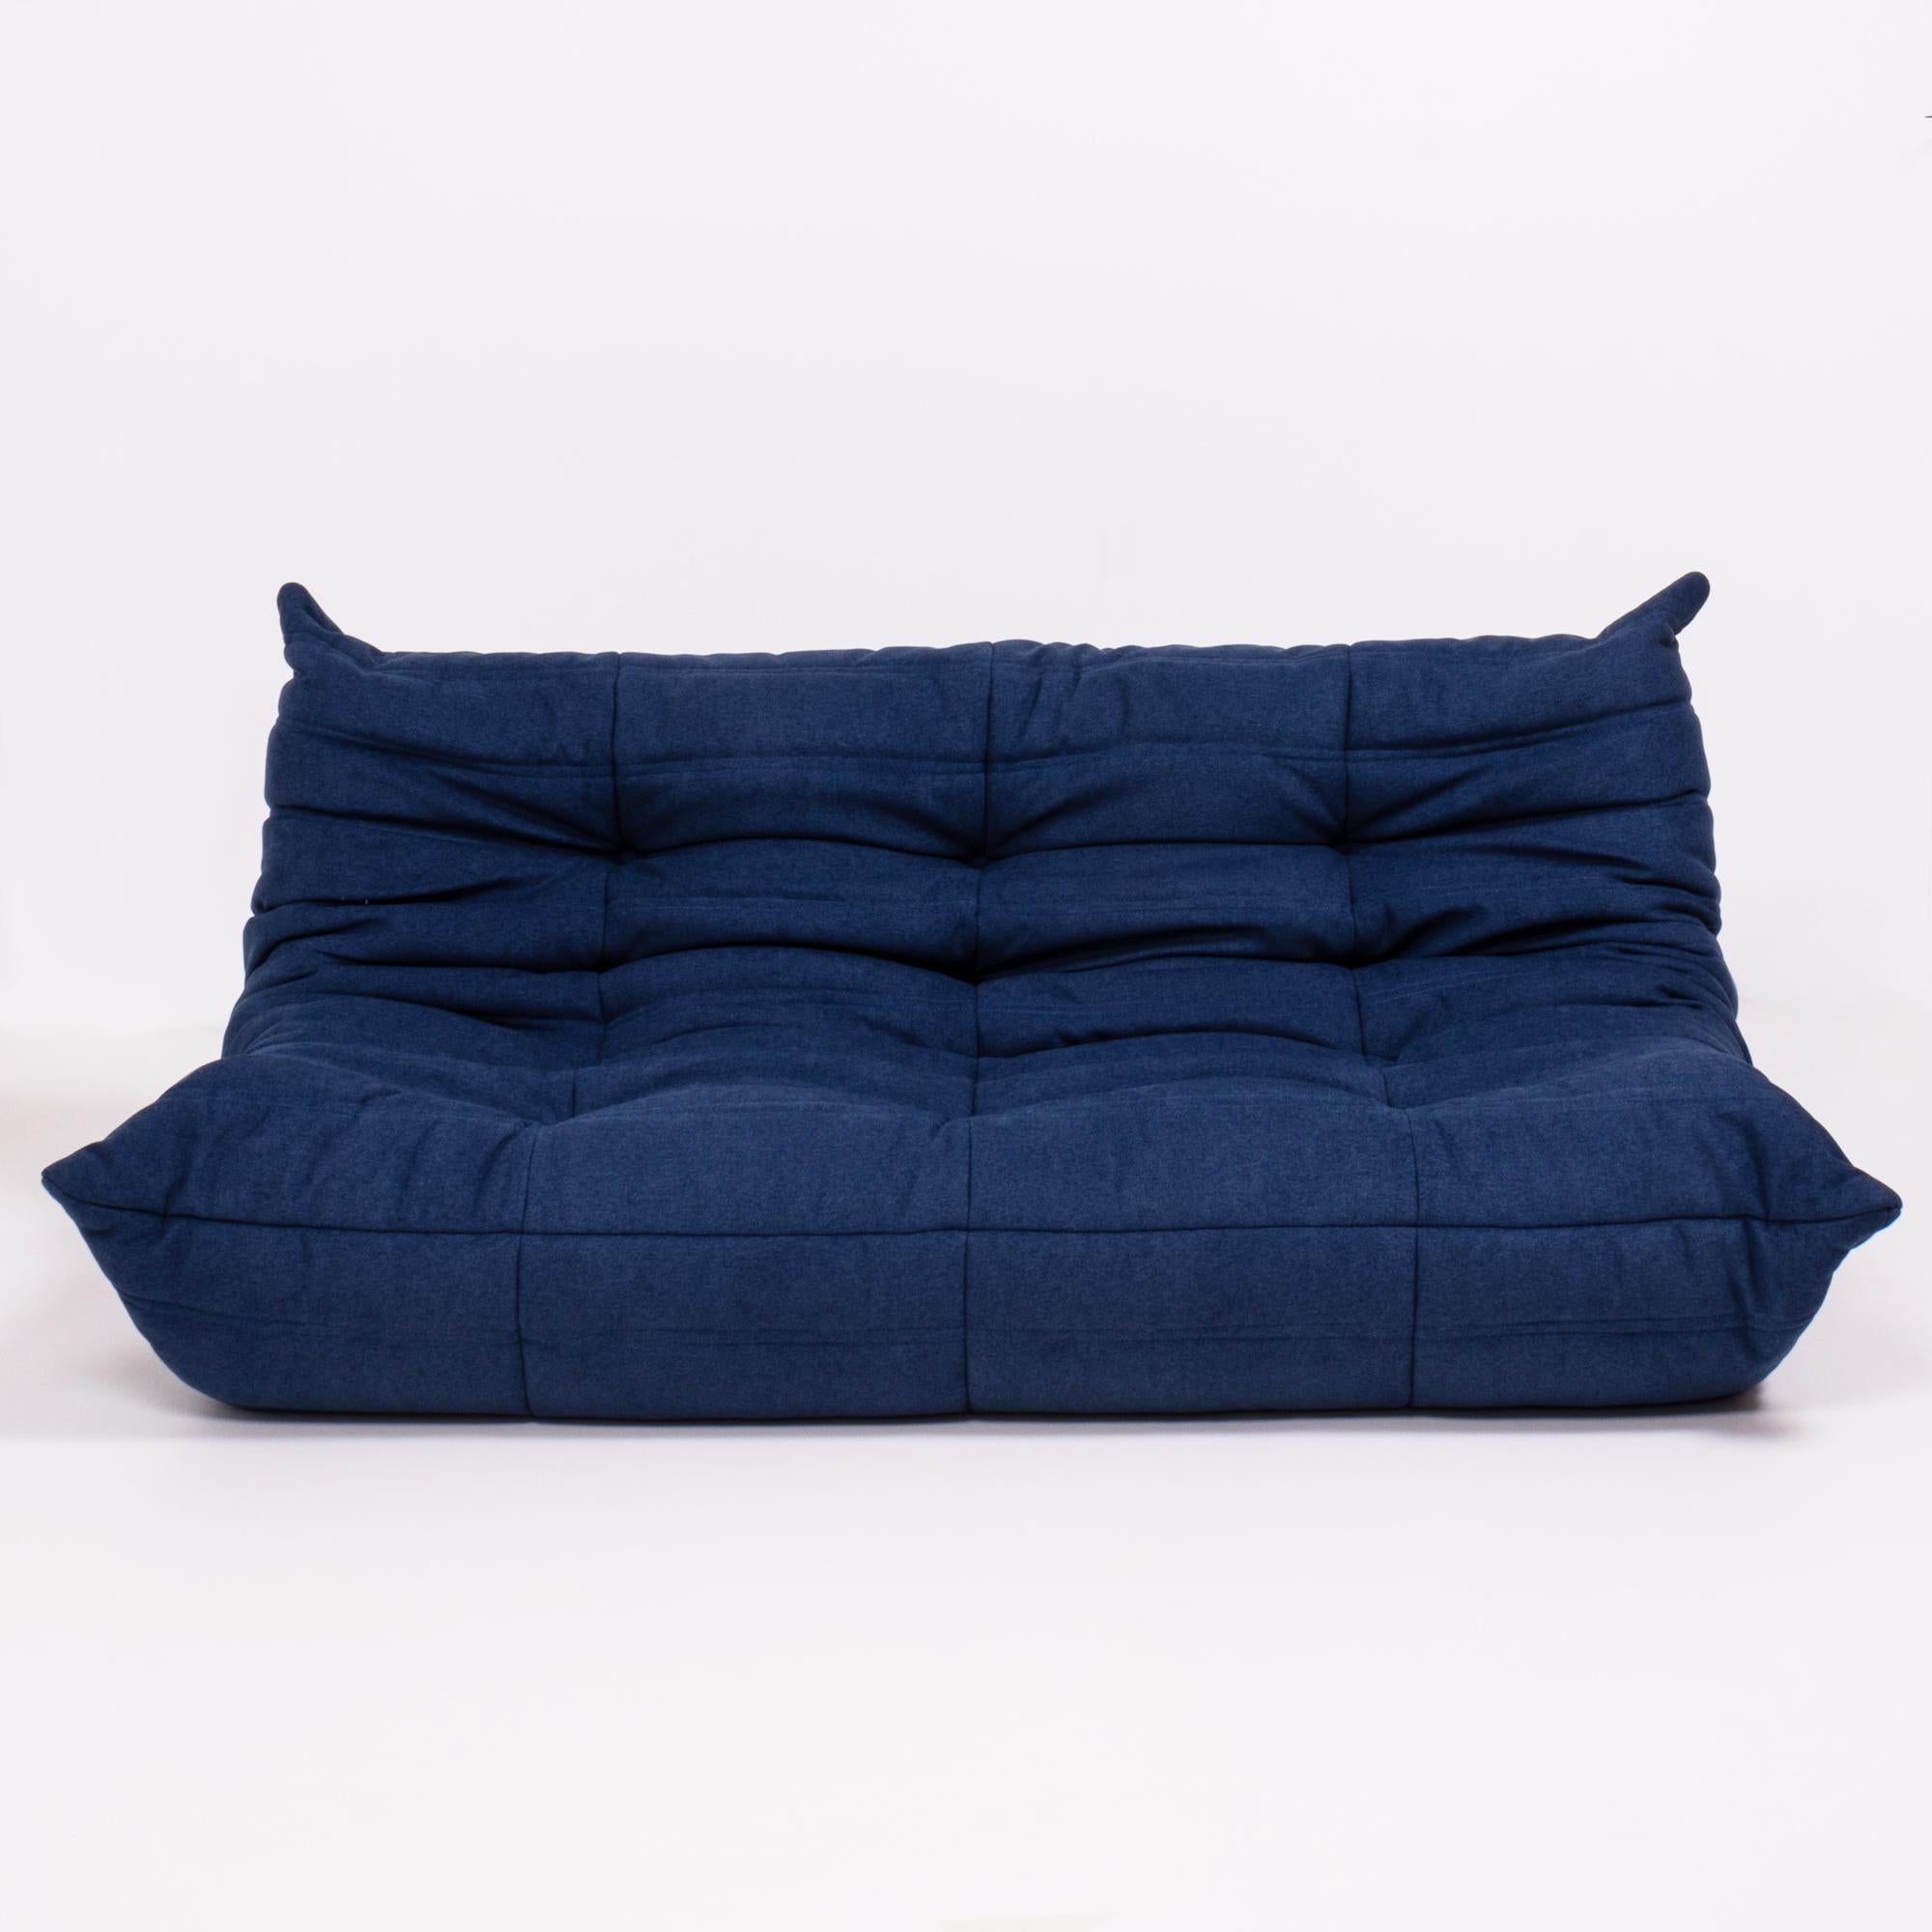 French Togo Blue Modular Sofa and Footstool by Michel Ducaroy for Ligne Roset, Set of 5